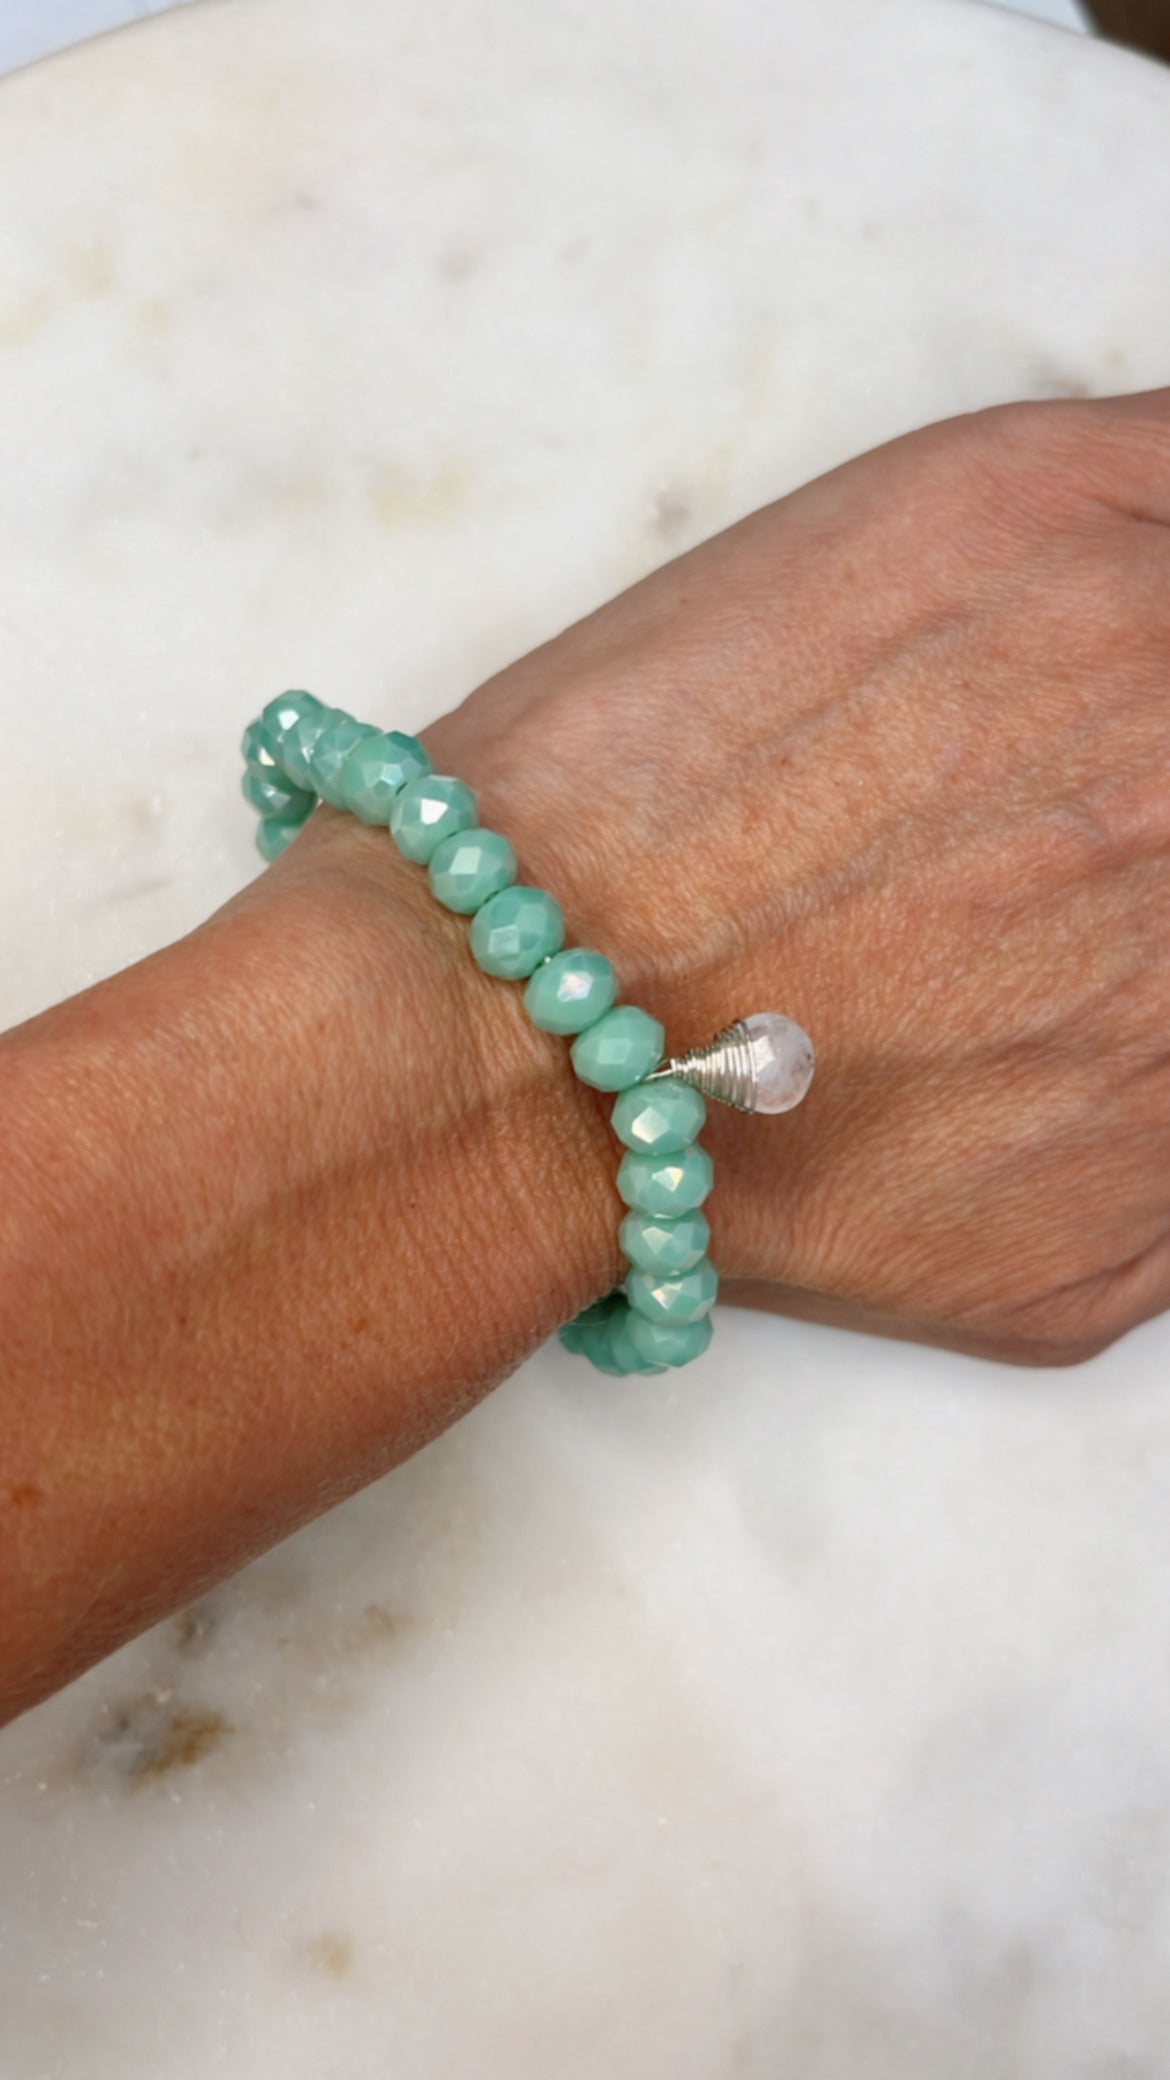 Sea Foam Green Crystal Stretch Bracelet with Moonstone Hand-Wrapped in Sterling Silver.